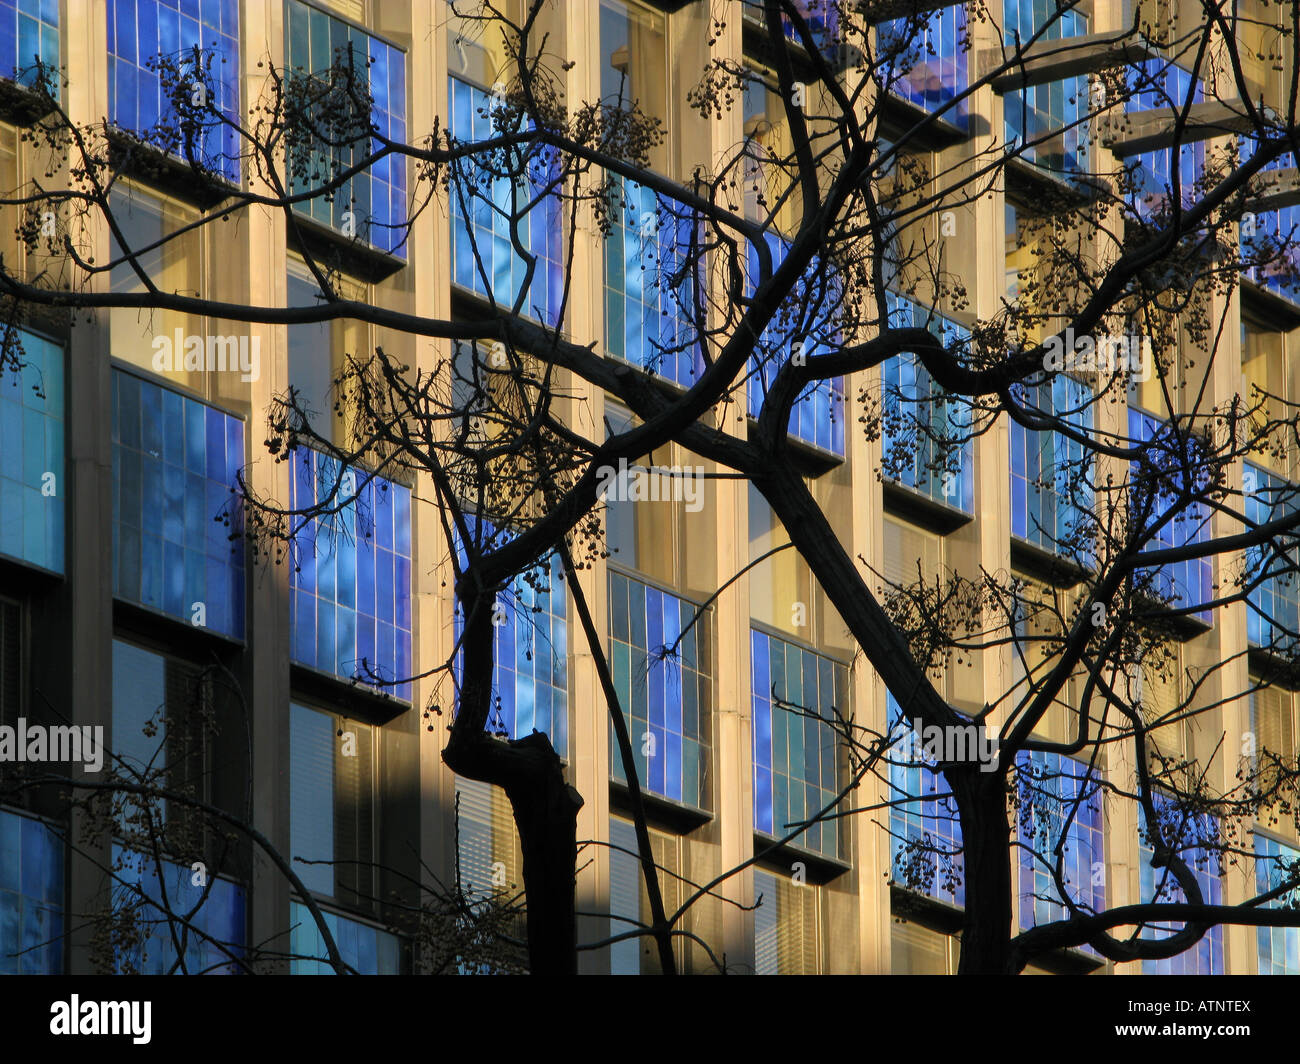 Black and blue - glass windows in Palma office block create a pattern. Silhouette of a tree in the foreground breaks the regularity Stock Photo